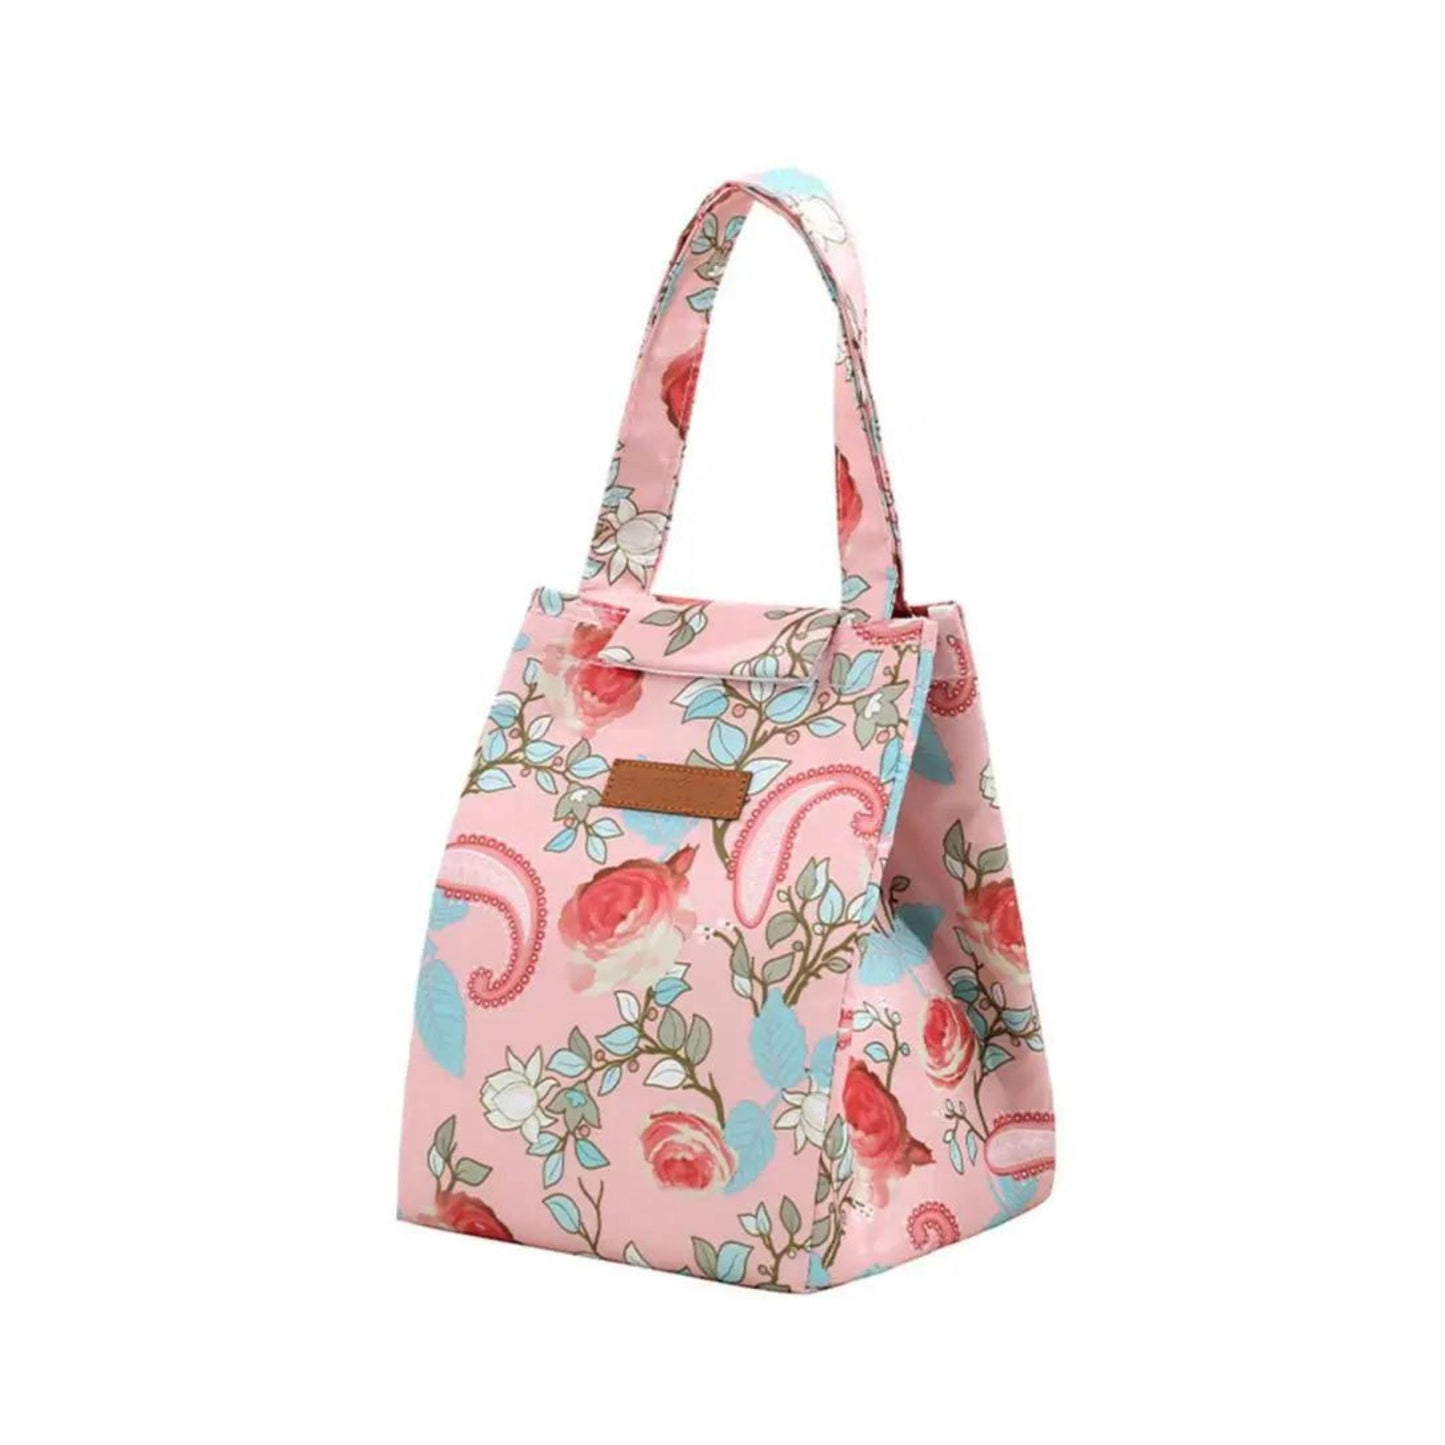 JM2303 Multi-Print Insulated Lunch Tote Bag